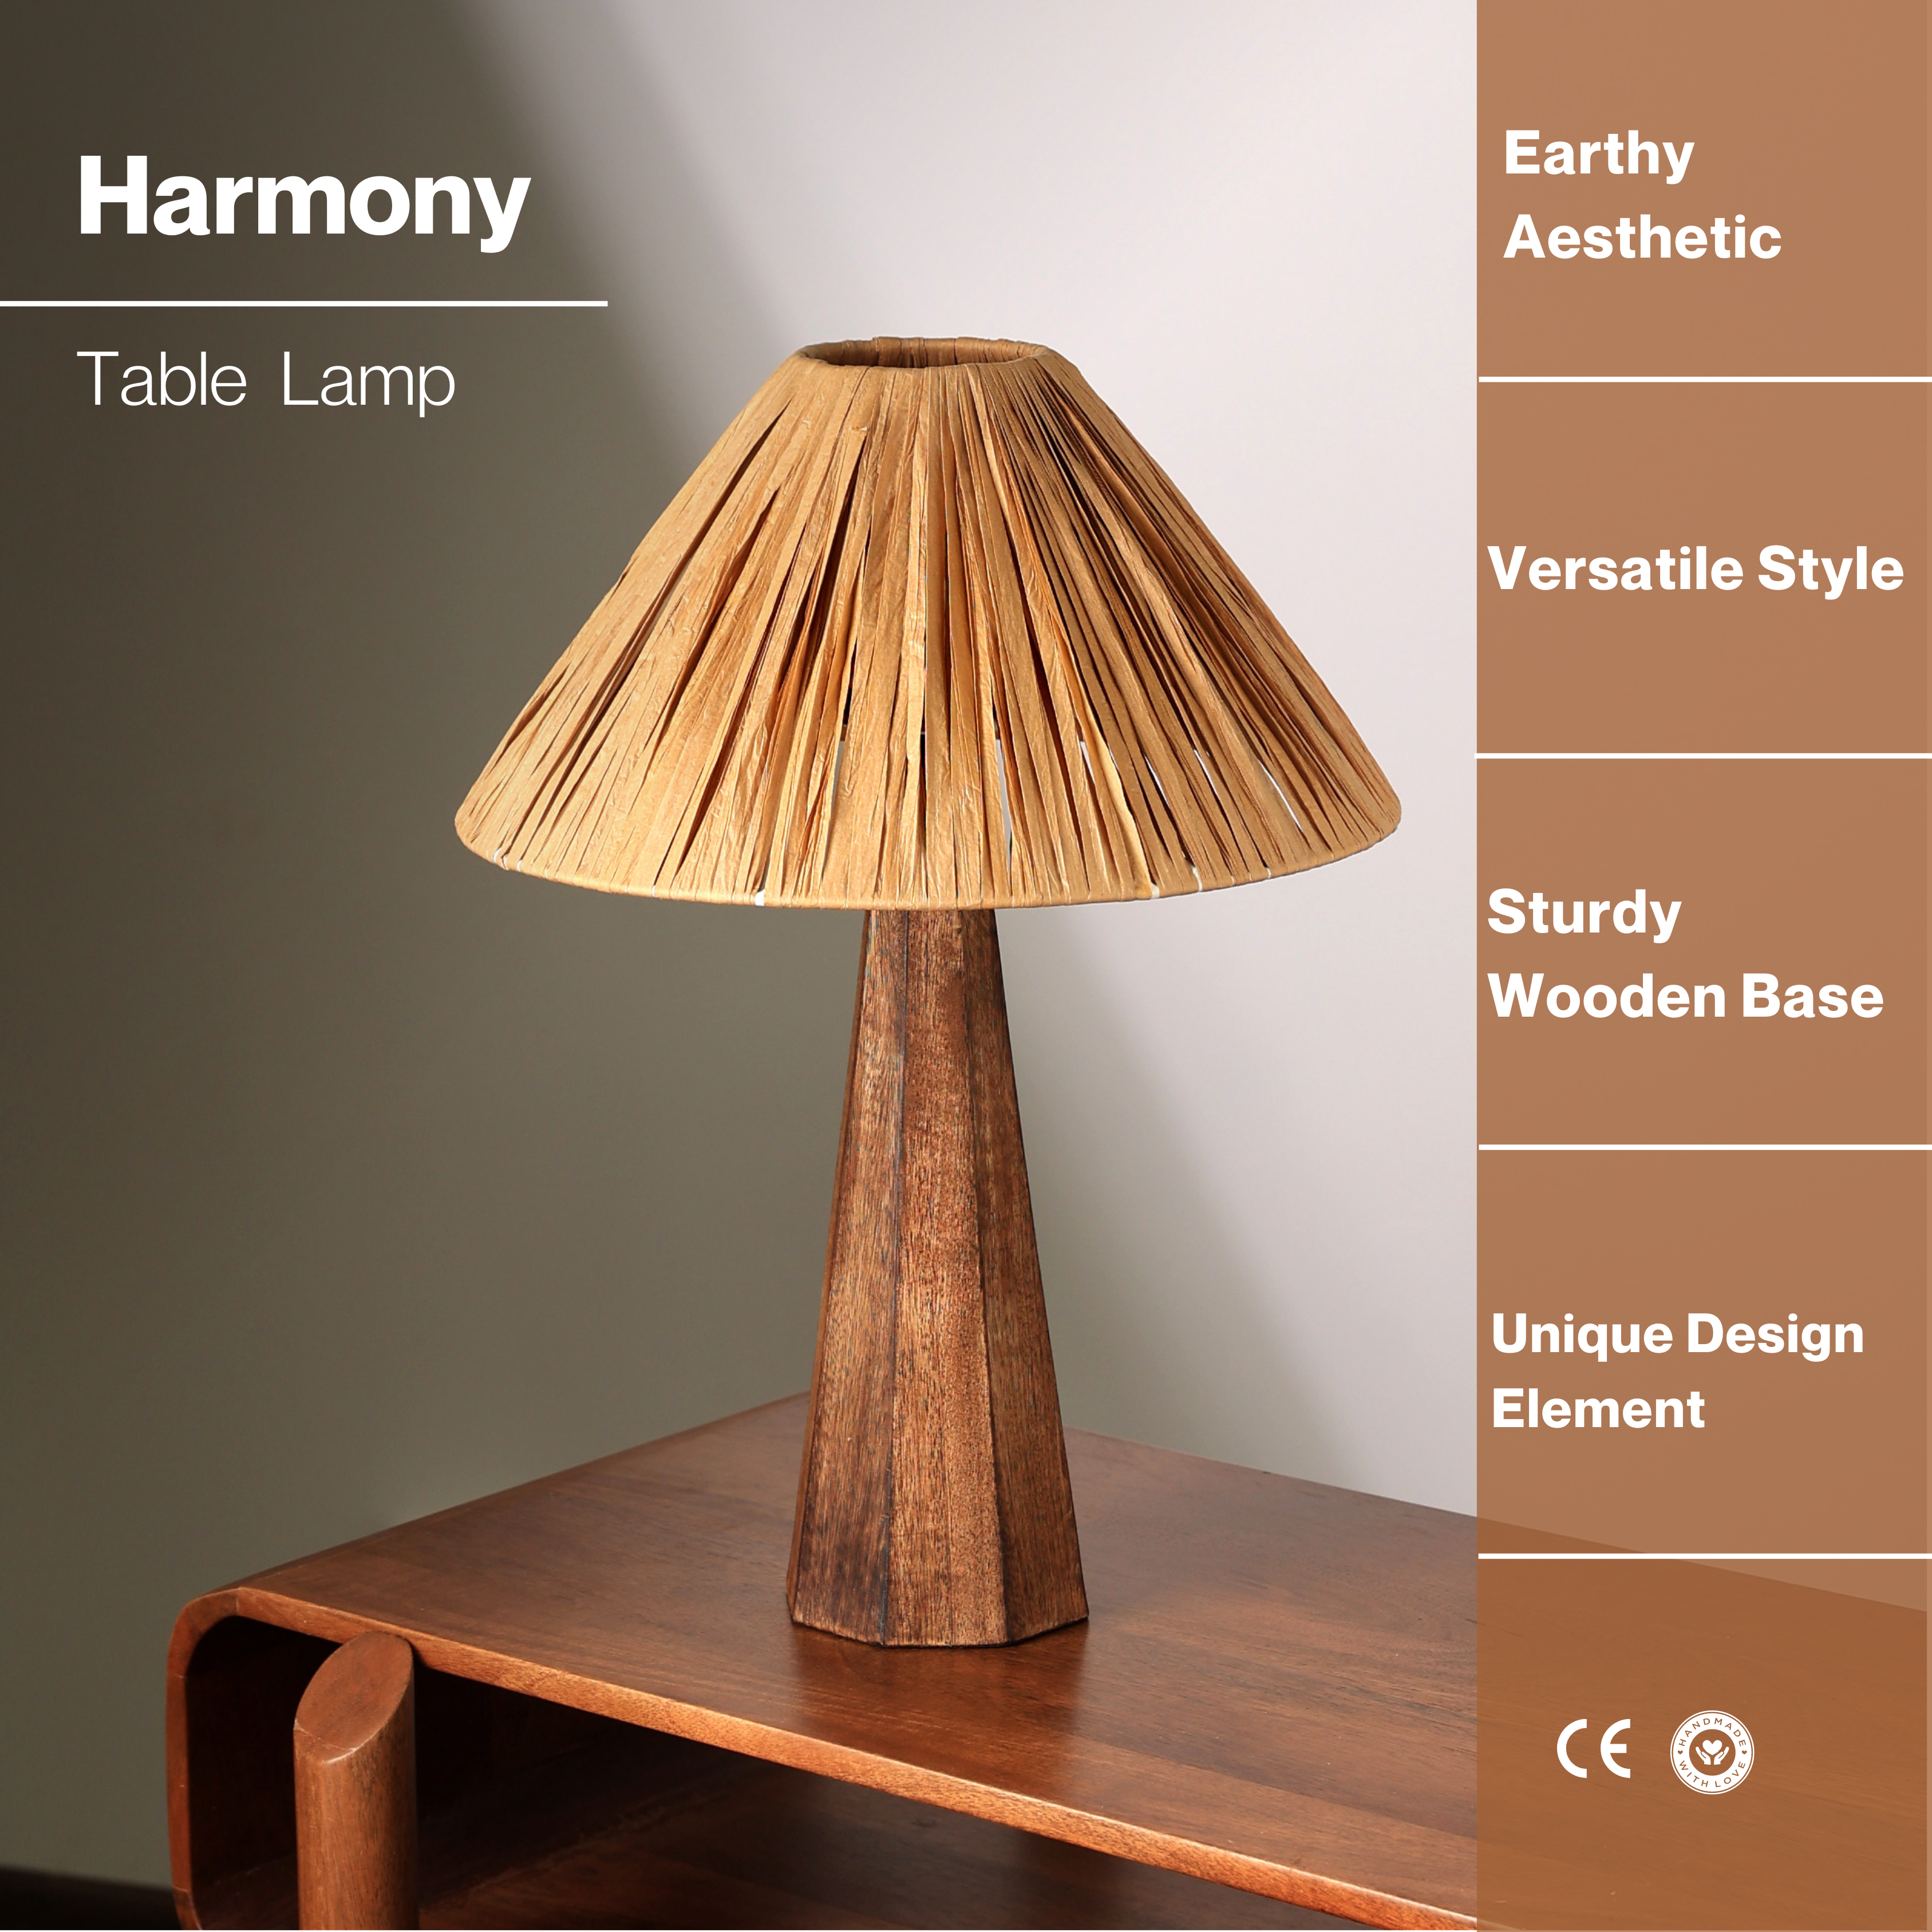 HARMONY TABLE LAMP - RAFFIA, NATURAL WOOD, PERFECT DESK LAMP FOR EARTHY SPACES